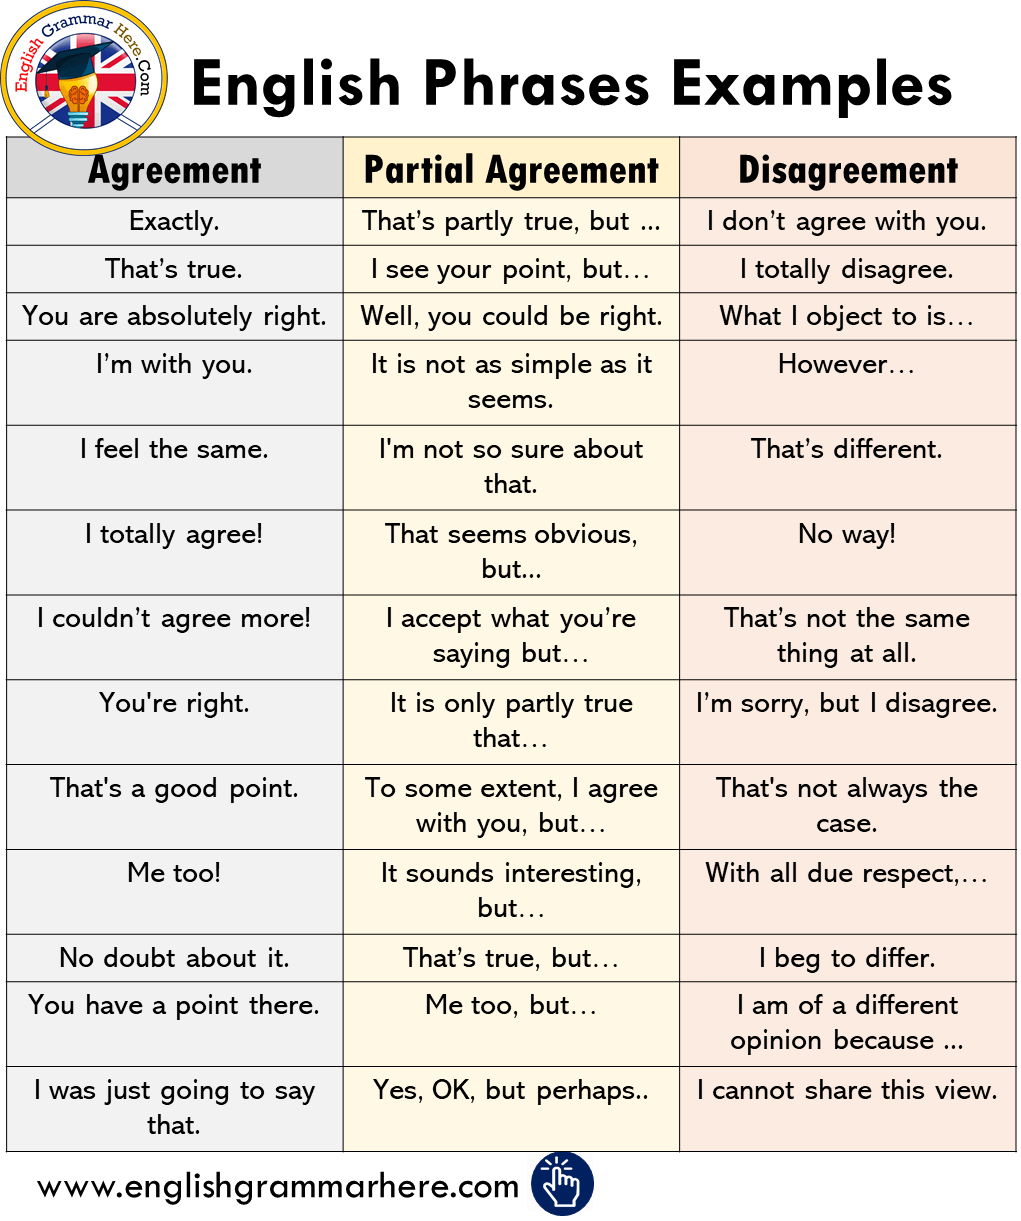 Agreement, Disagreement and Partial Agreement Phrases Examples